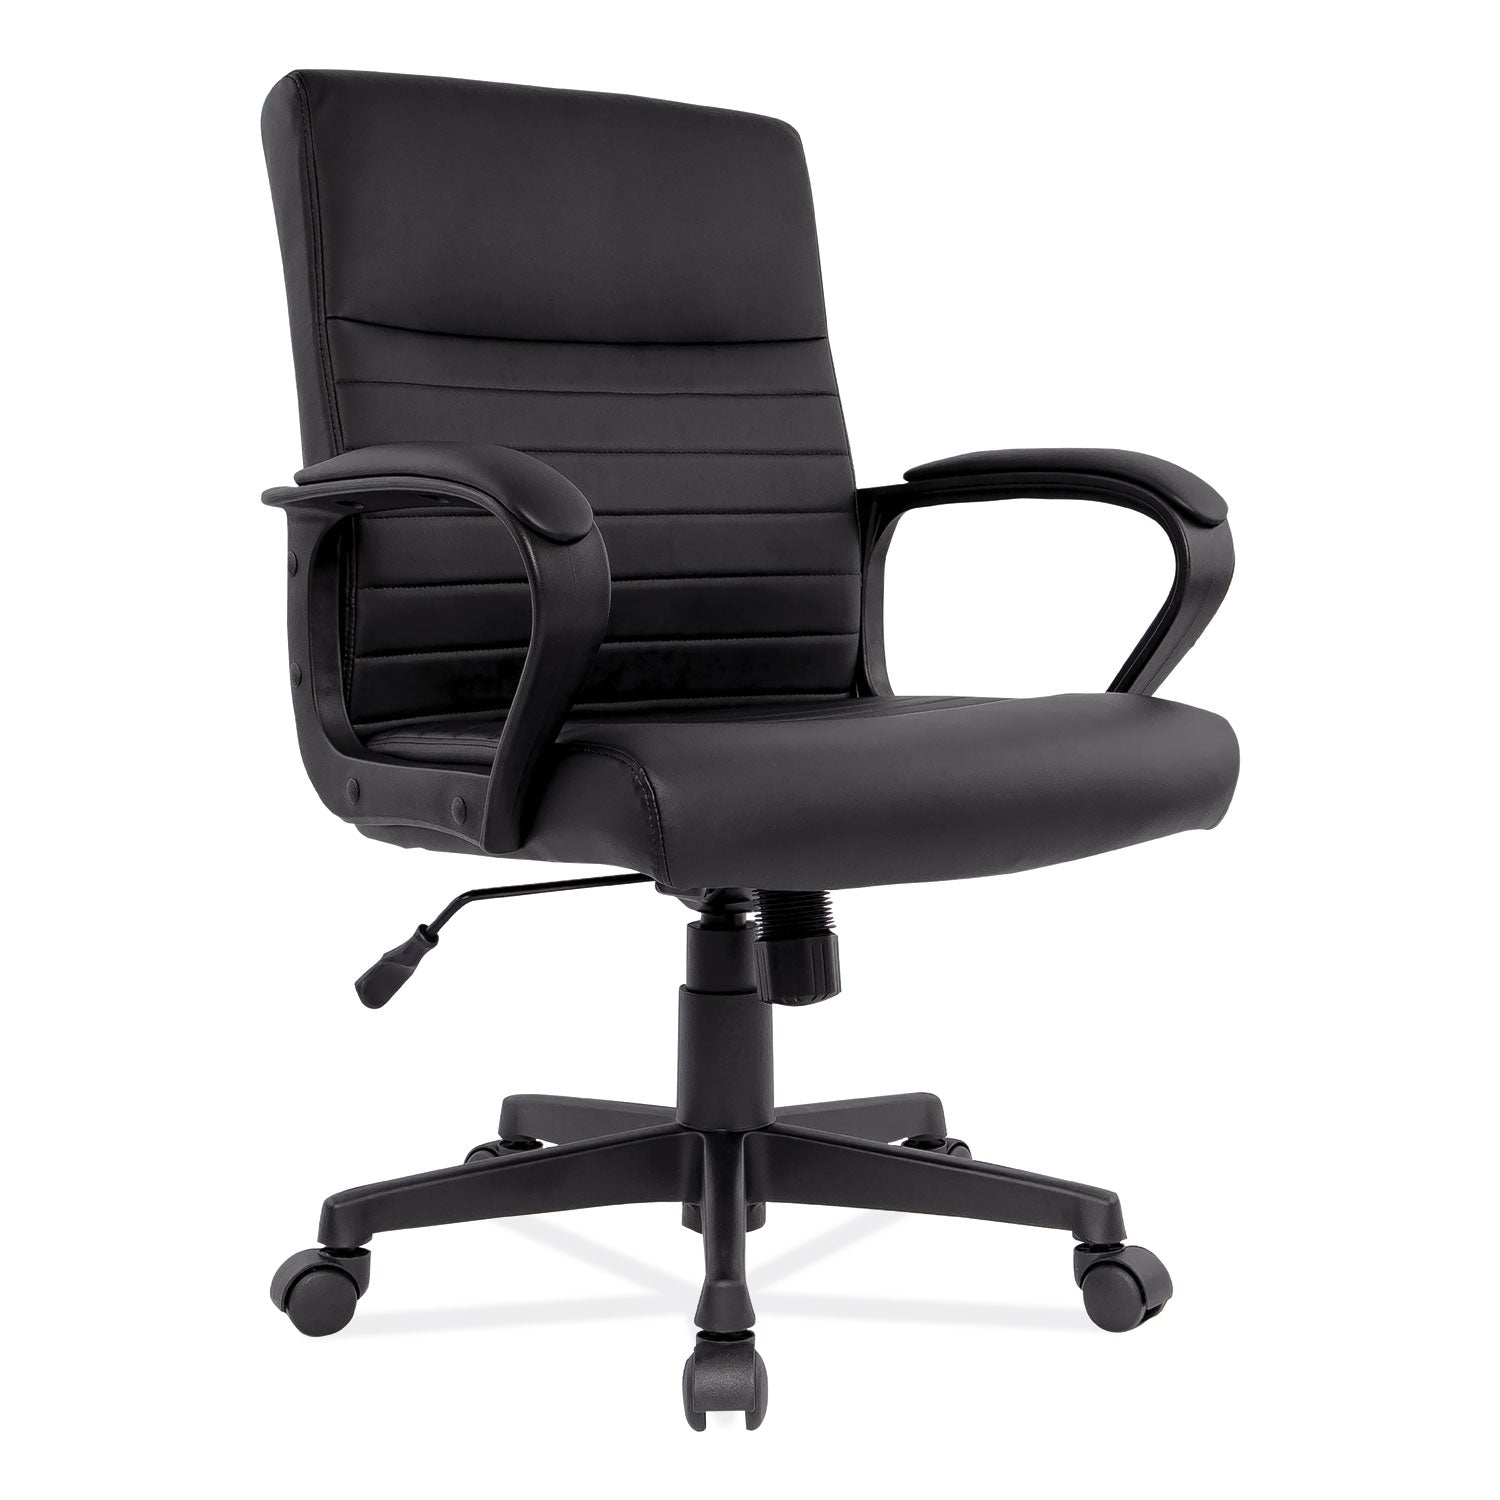 Alera Breich Series Manager Chair, Supports Up to 275 lbs, 16.73" to 20.39" Seat Height, Black Seat/Back, Black Base - 1